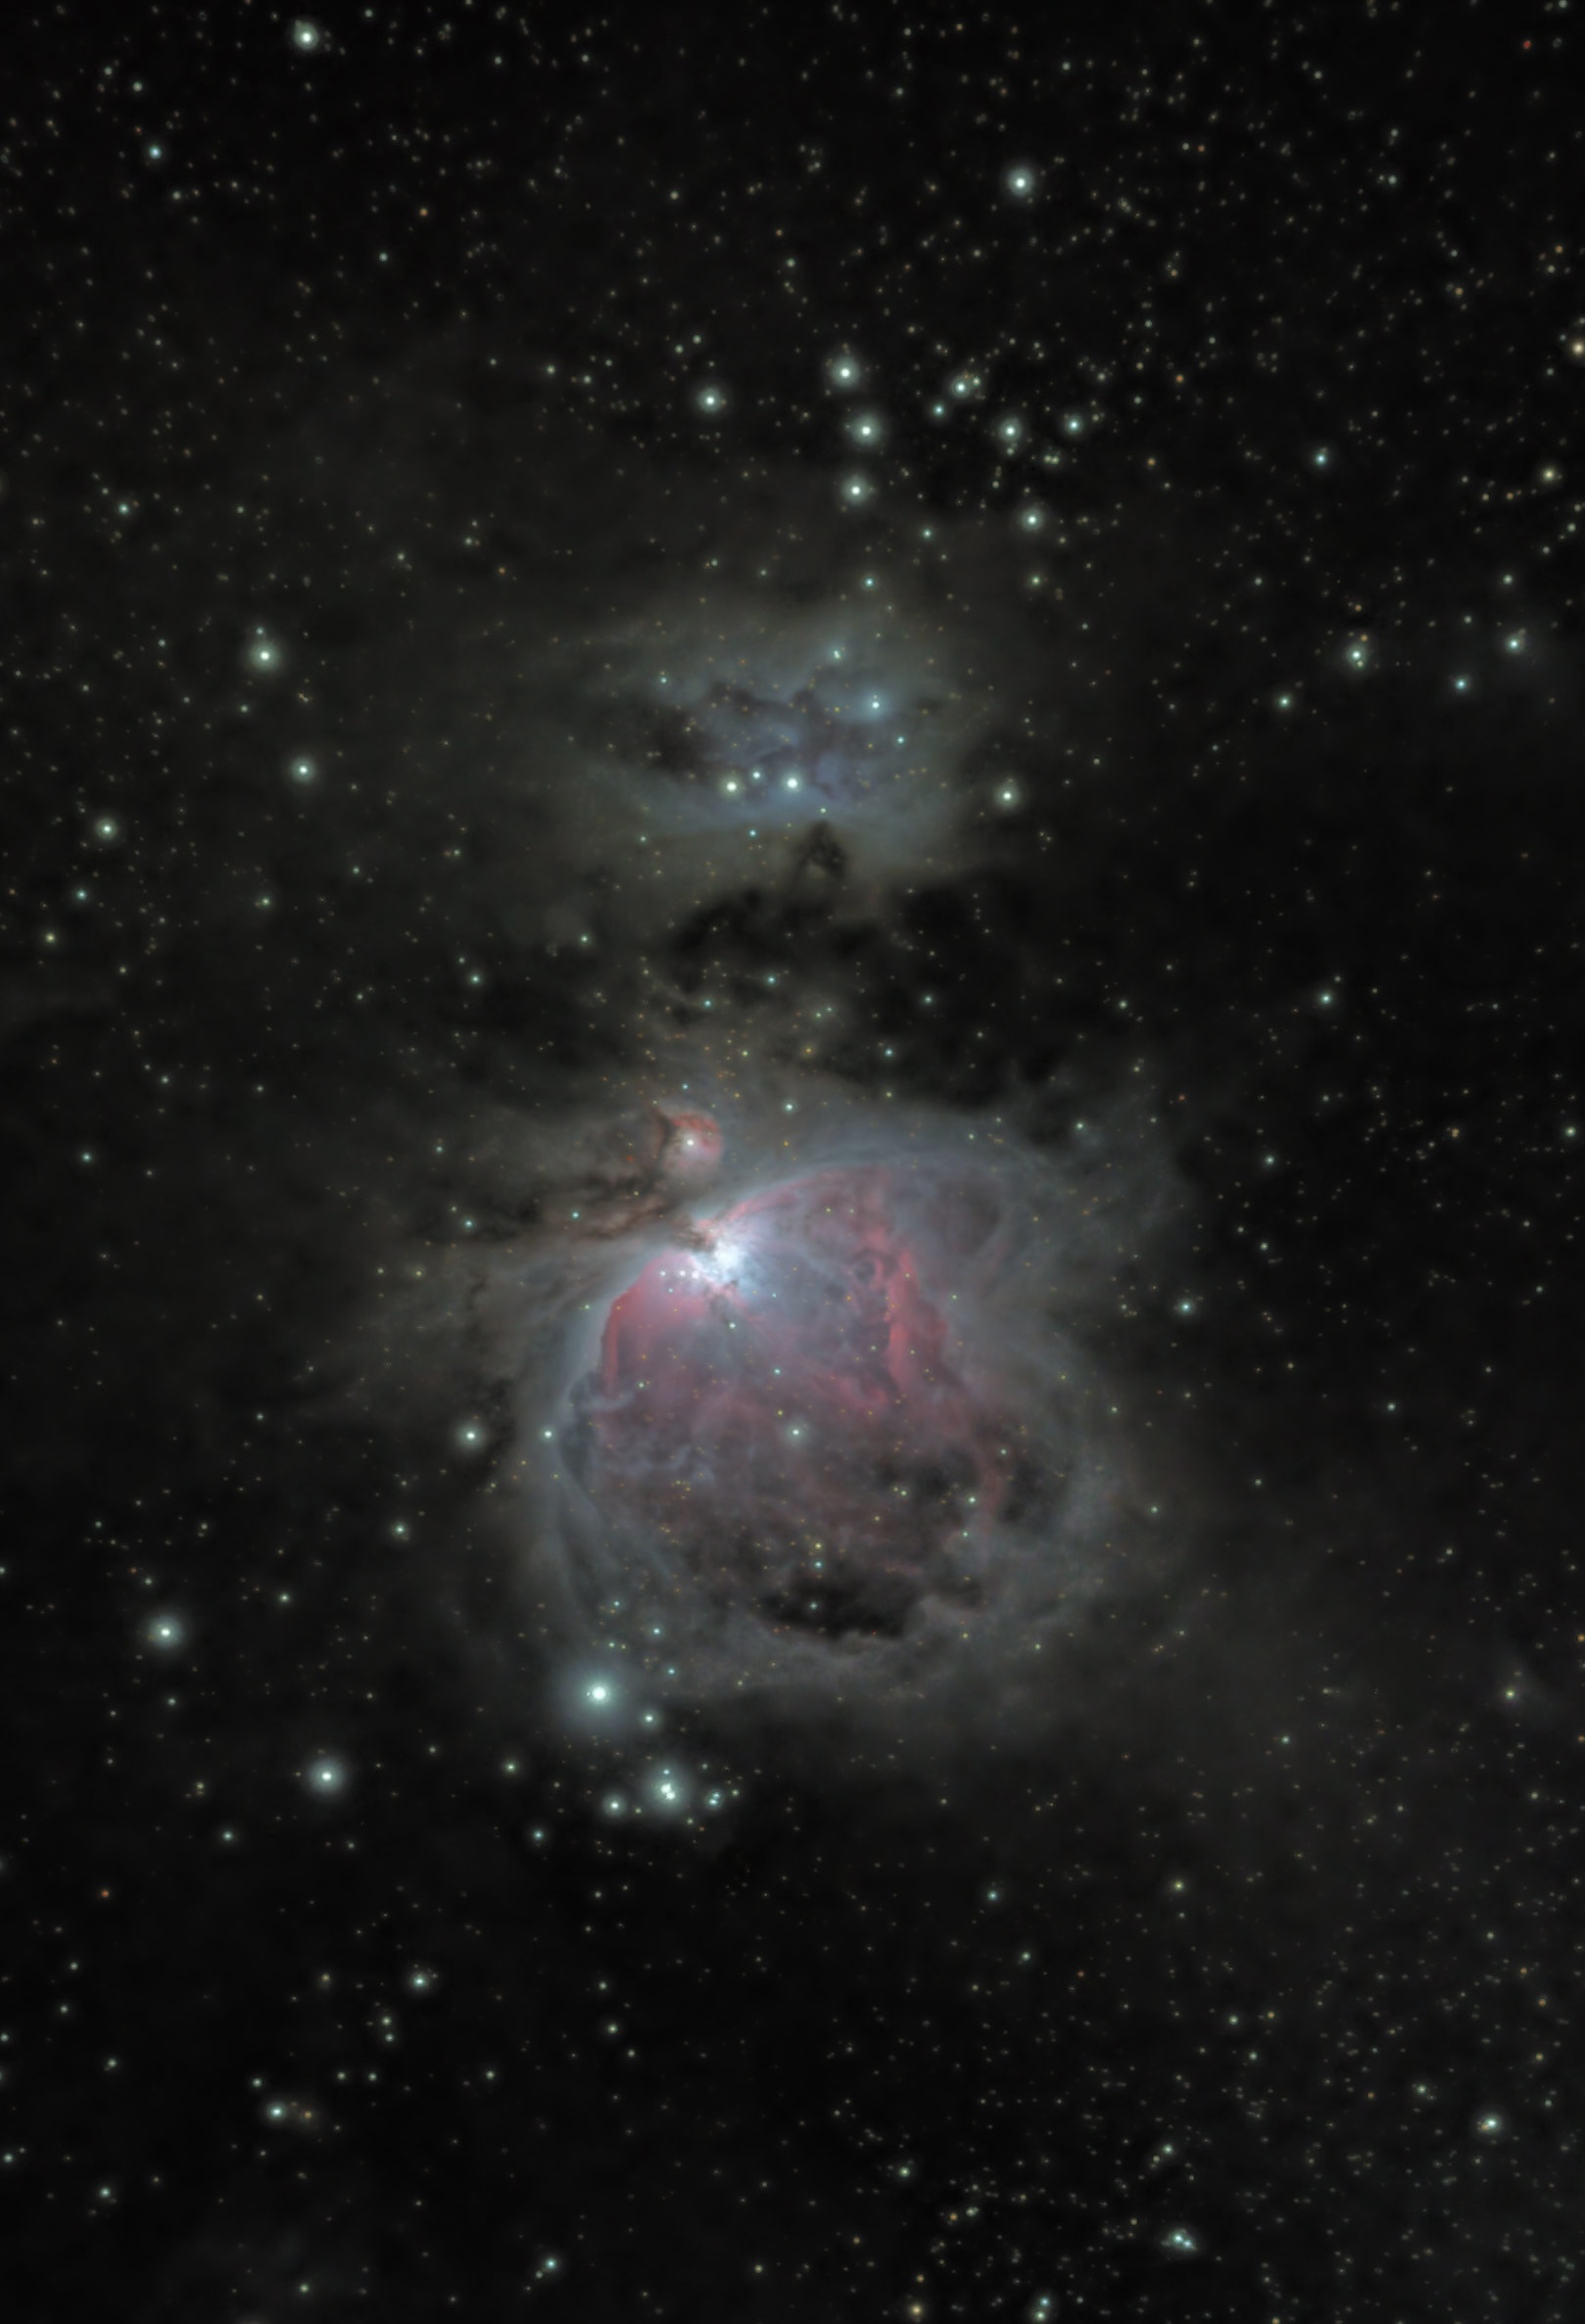 Just another M42